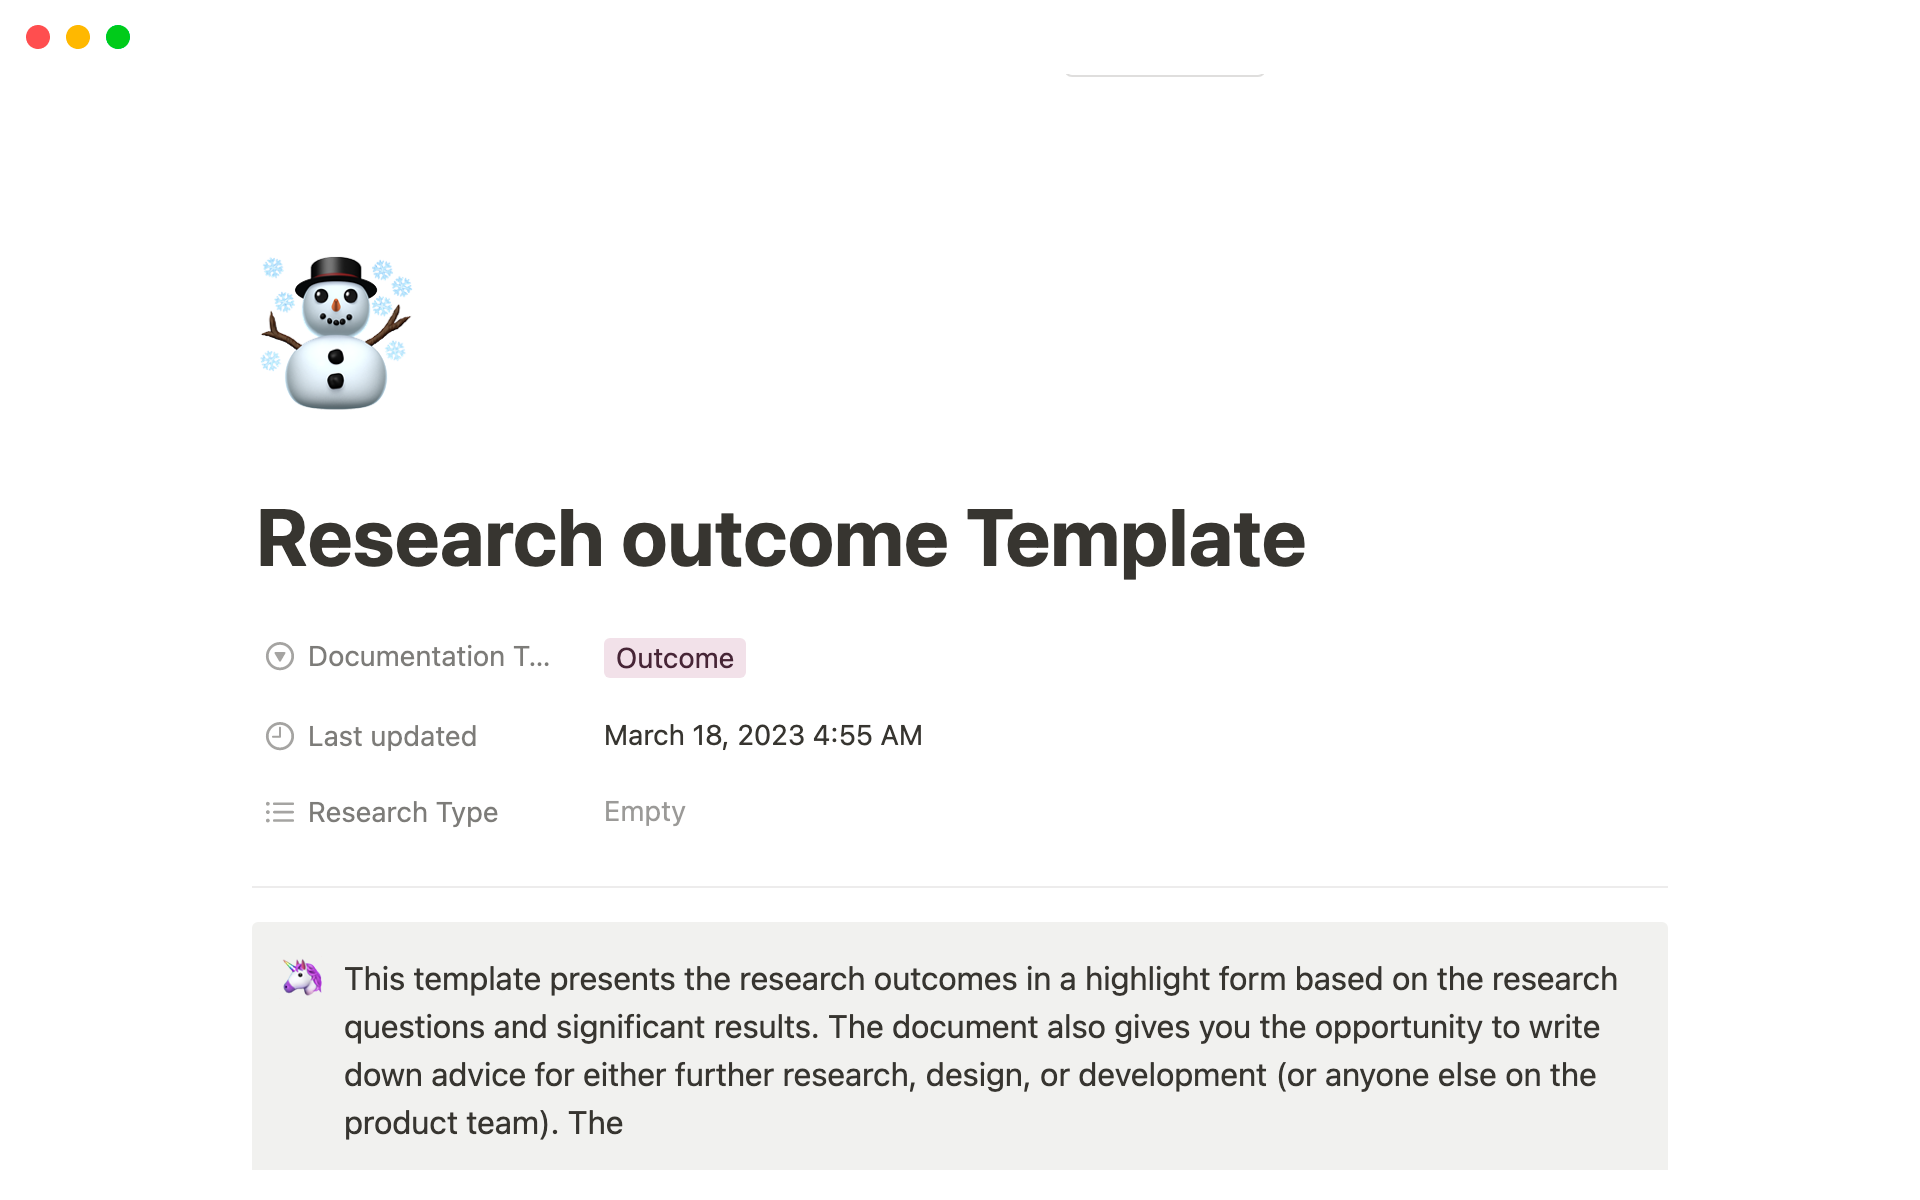 This template gives UX Researchers a structure to present their research outcomes to the product teams